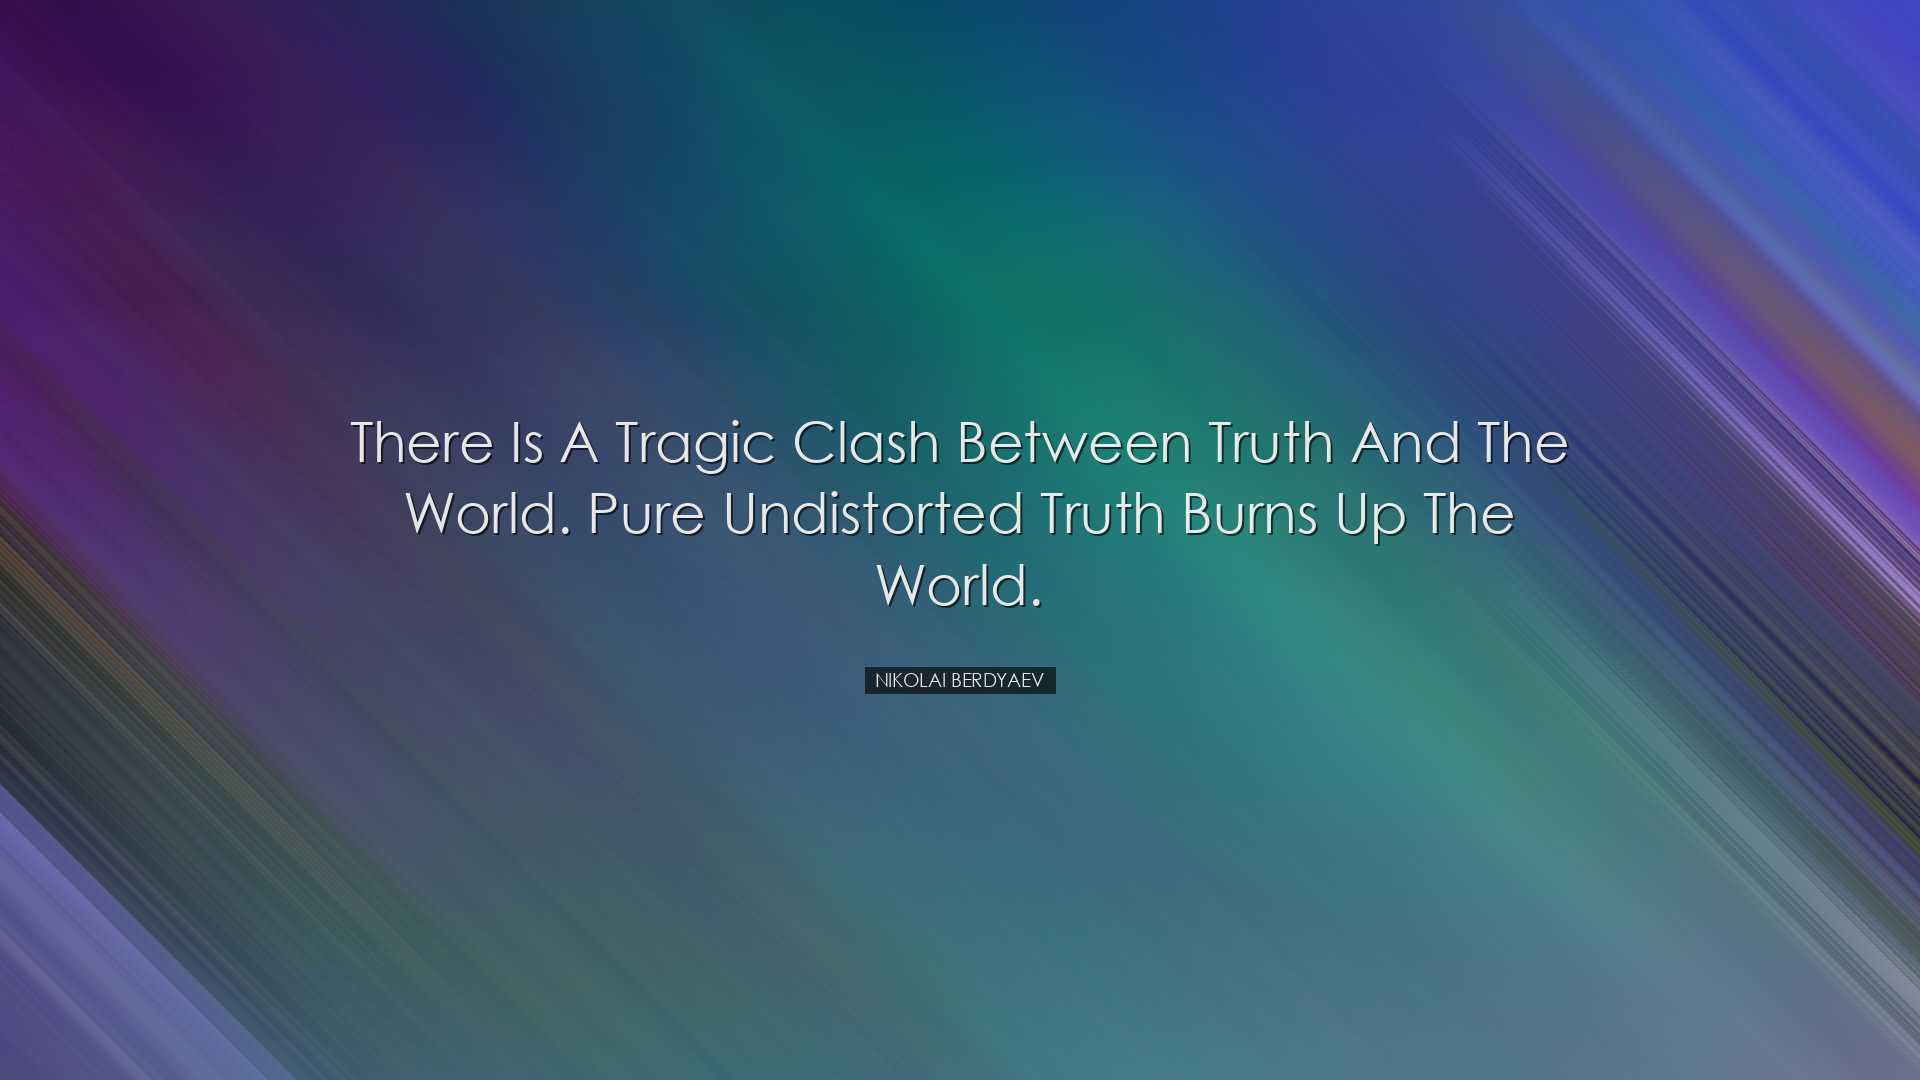 There is a tragic clash between Truth and the world. Pure undistor